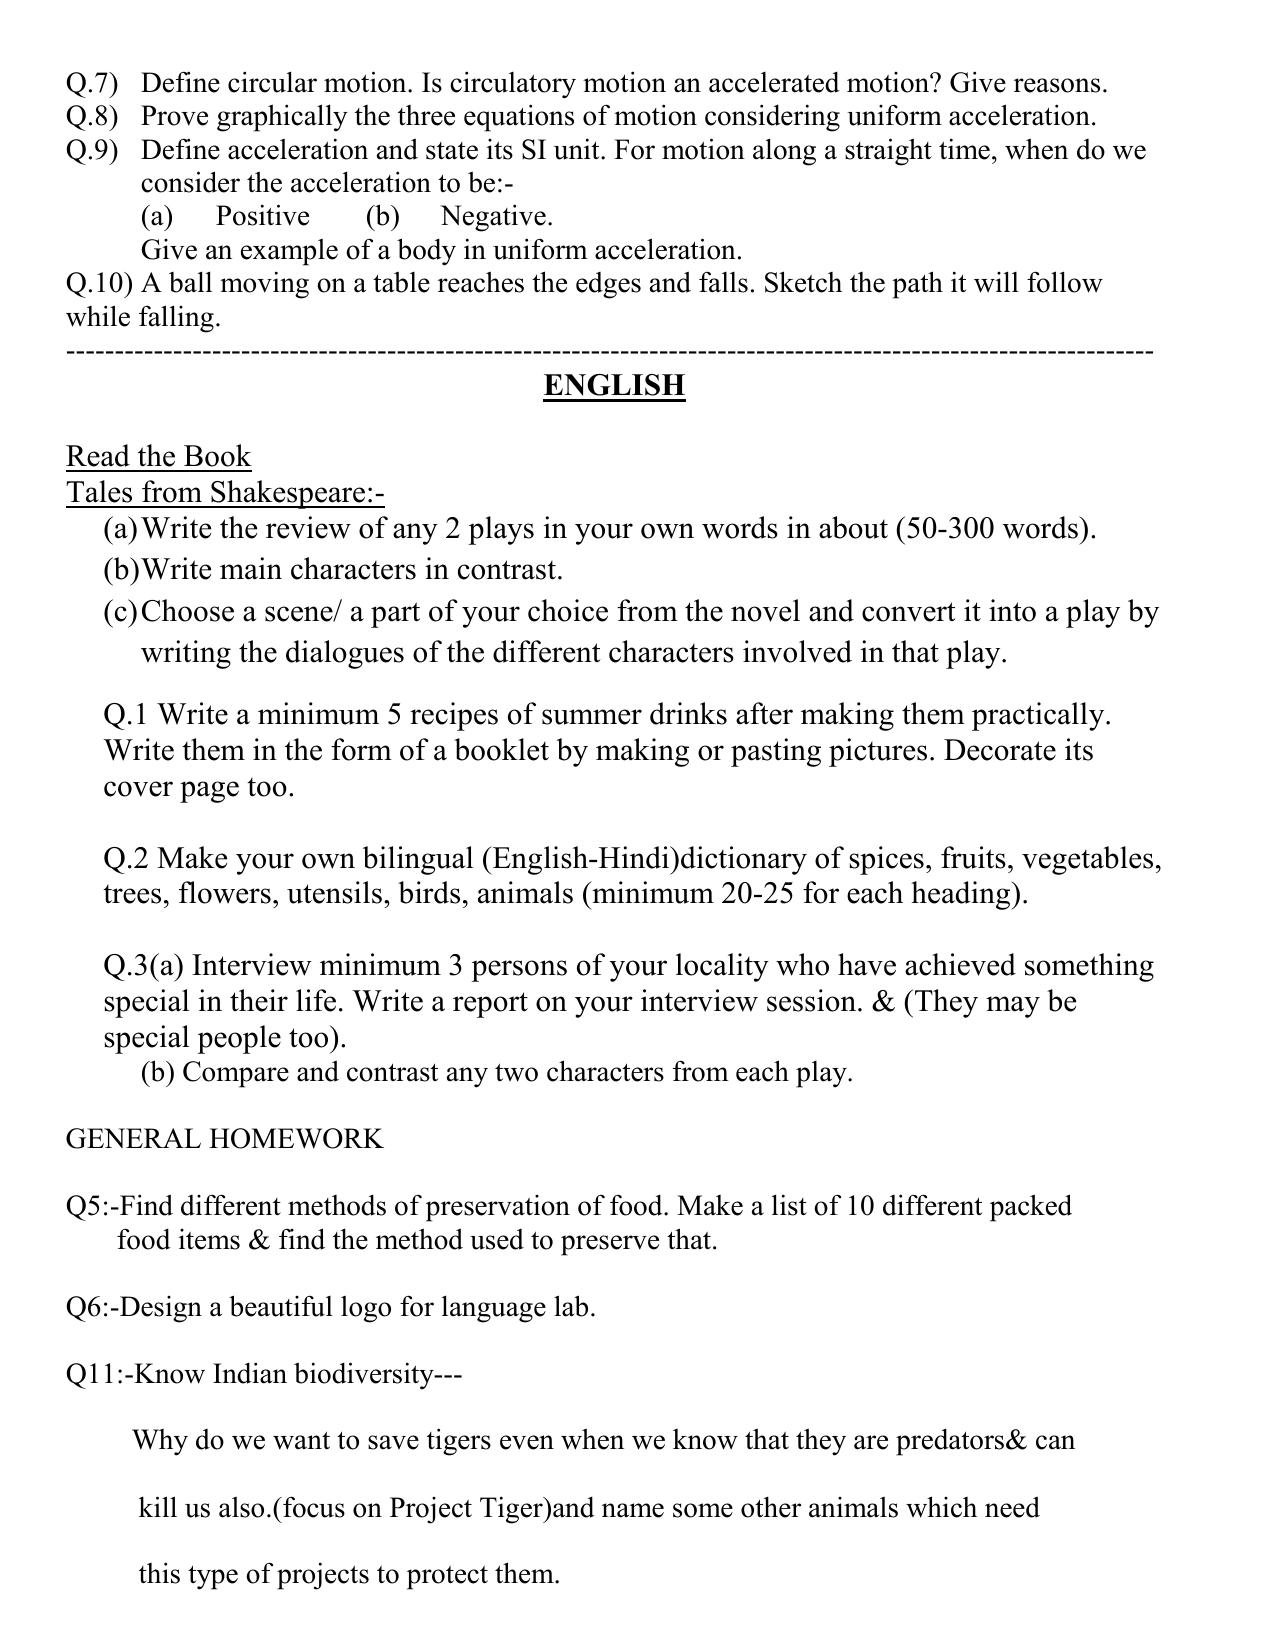 CBSE Worksheets for Class 9 Assignment 5 - Page 3